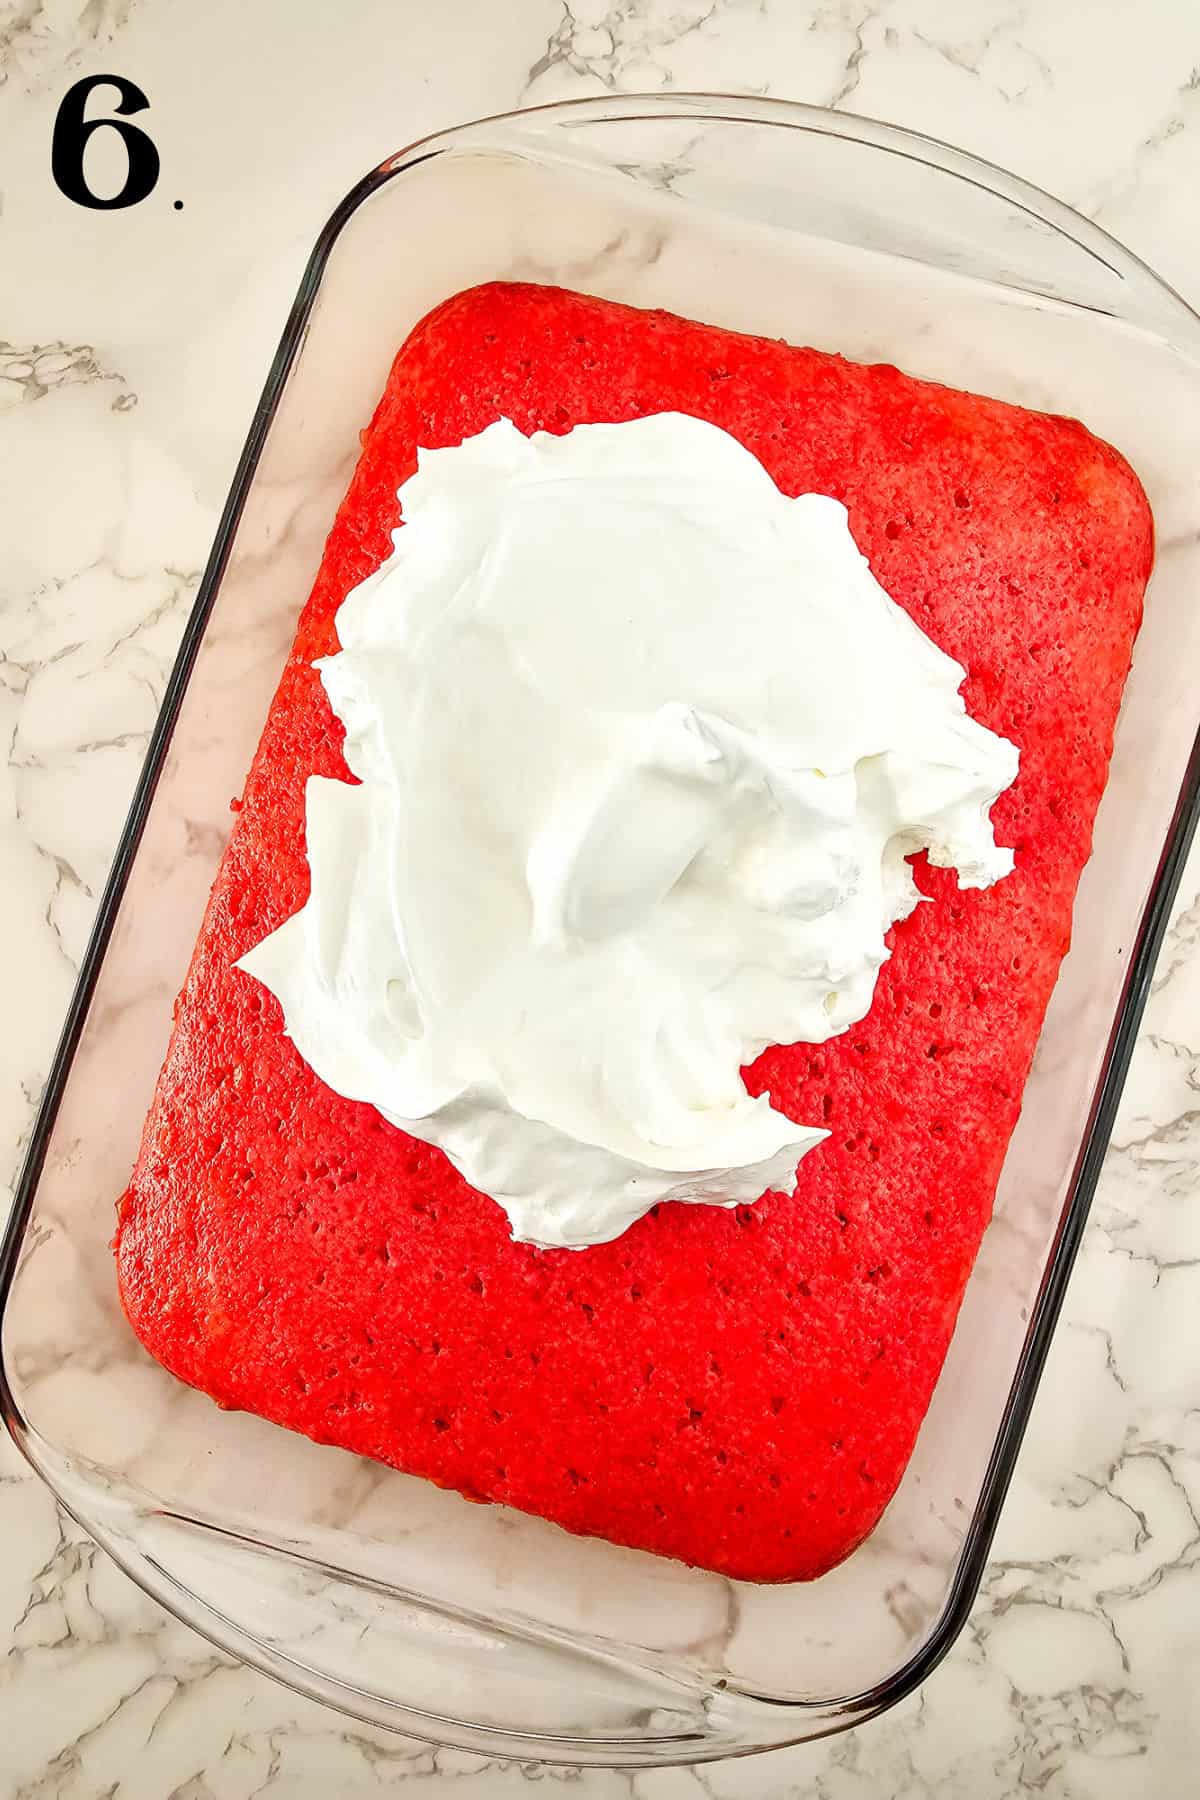 How to Make Cherry Poke Cake - Step 6 adding whipped topping.